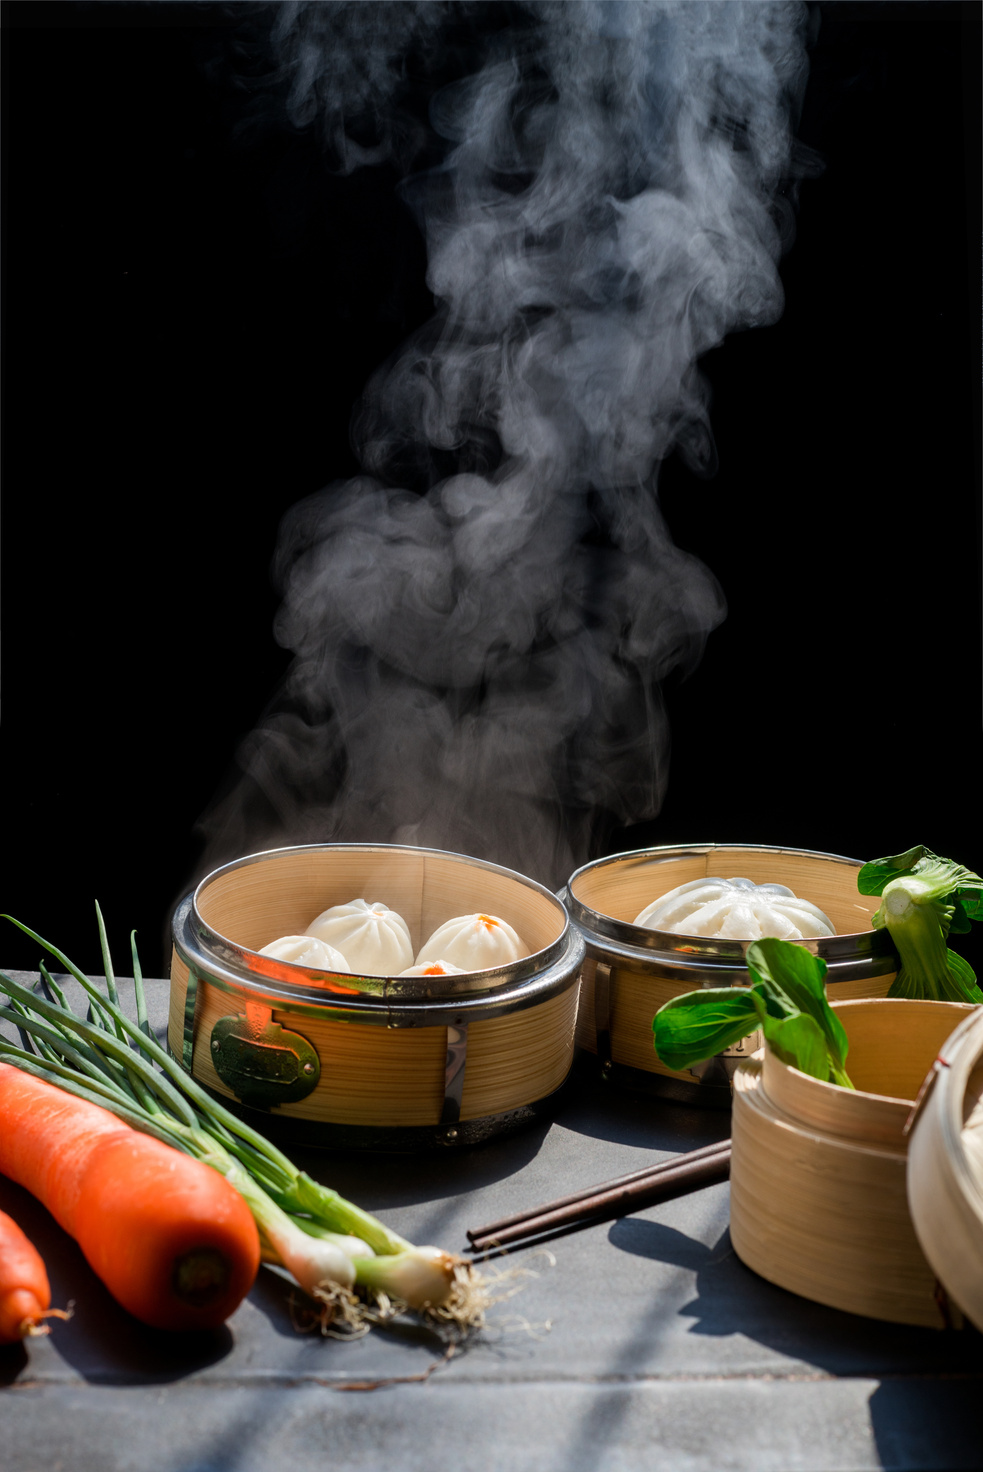 Steaming Dimsum on Wooden Baskets